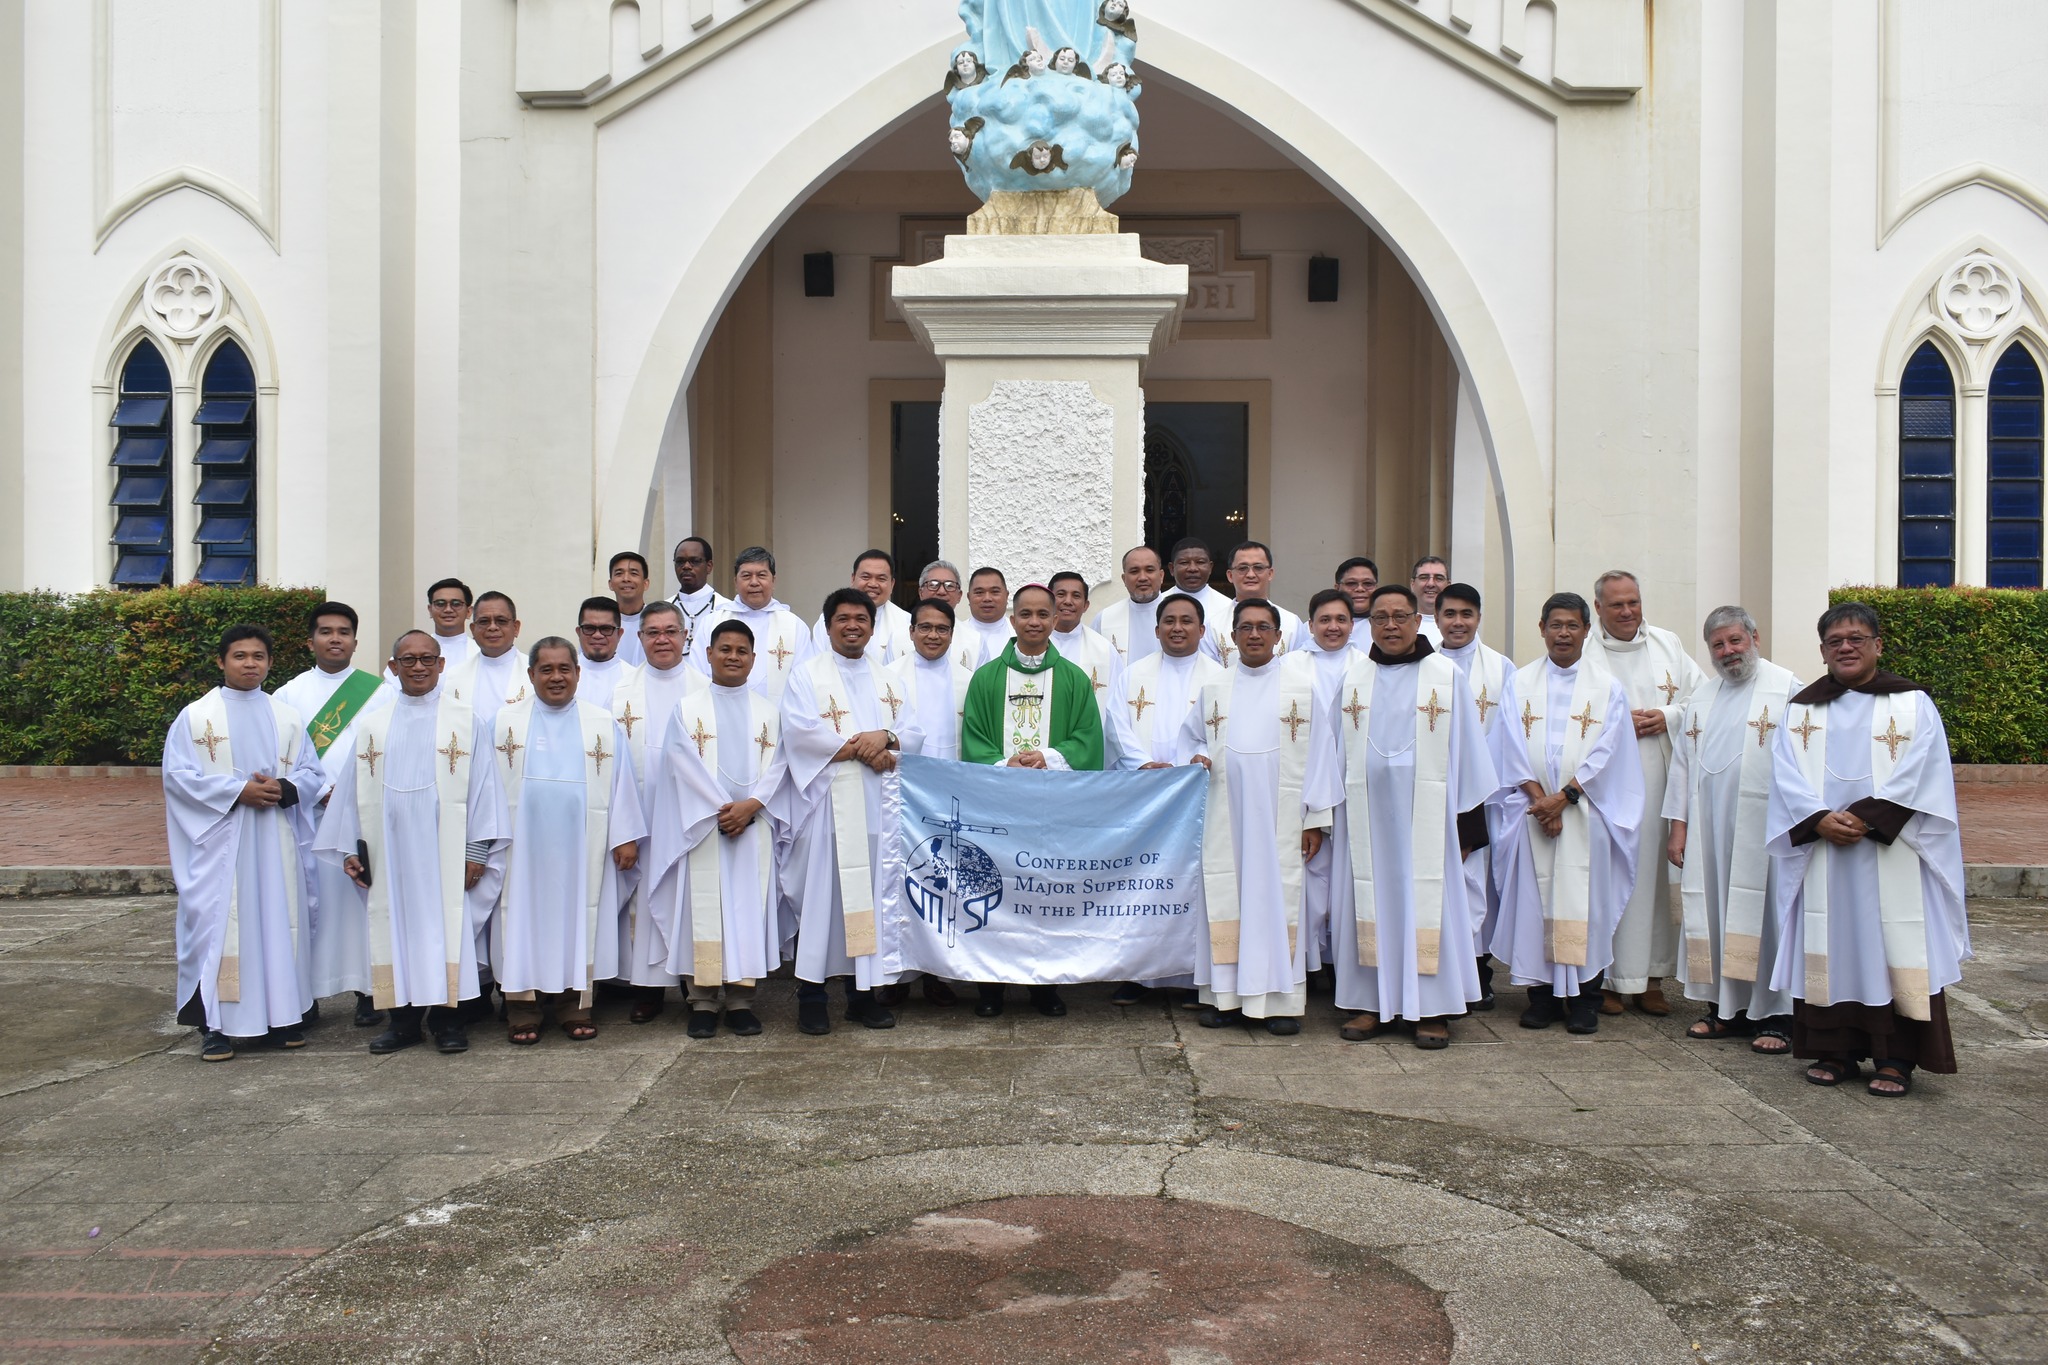 Mutual relations between bishops and consecrated persons